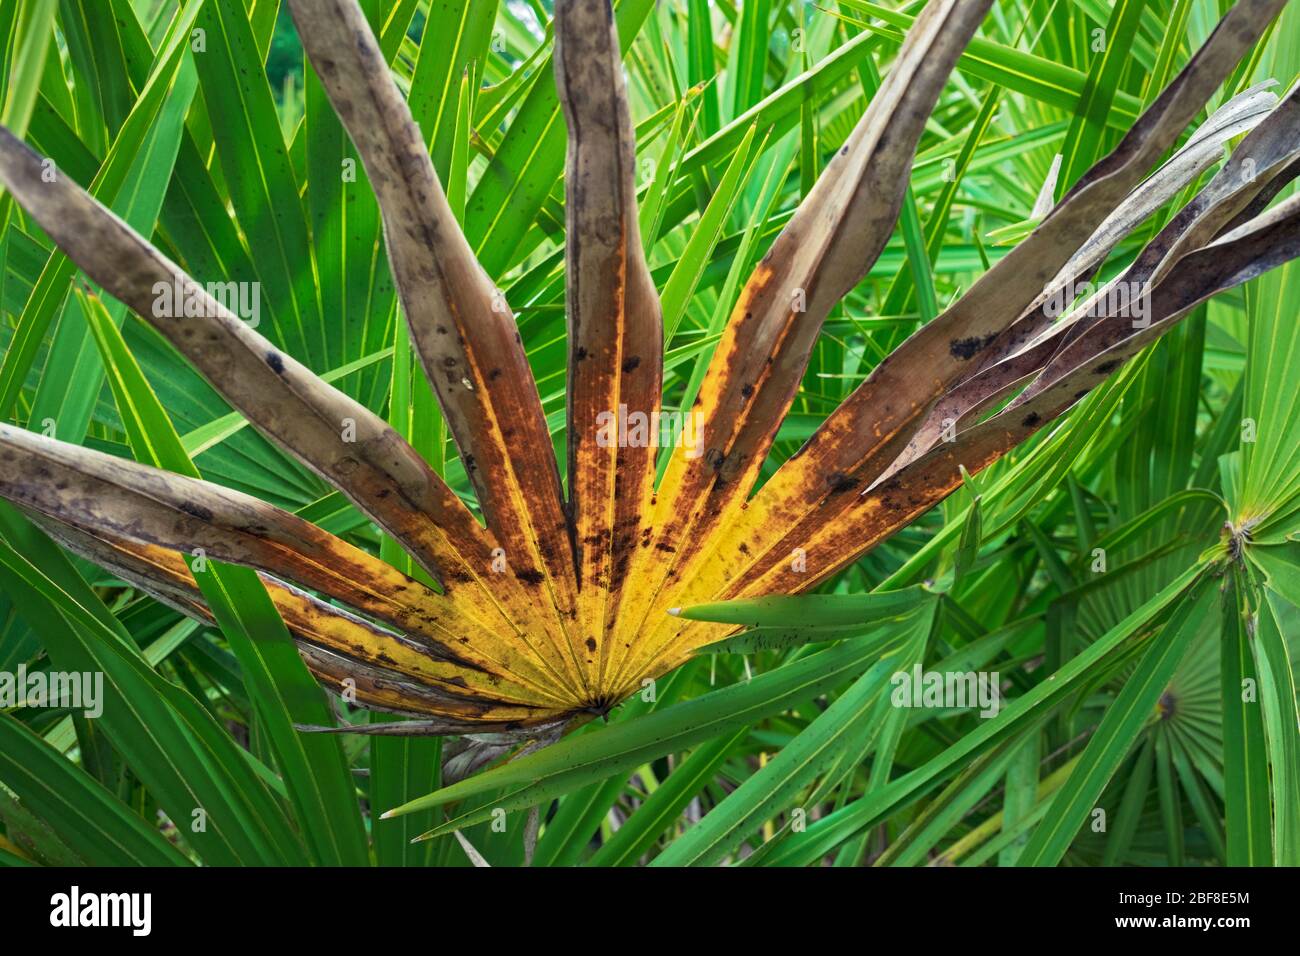 A yellowing palm of a saw palmetto plant in Florida scrub land. Bright yellow and greens of Florida Stock Photo